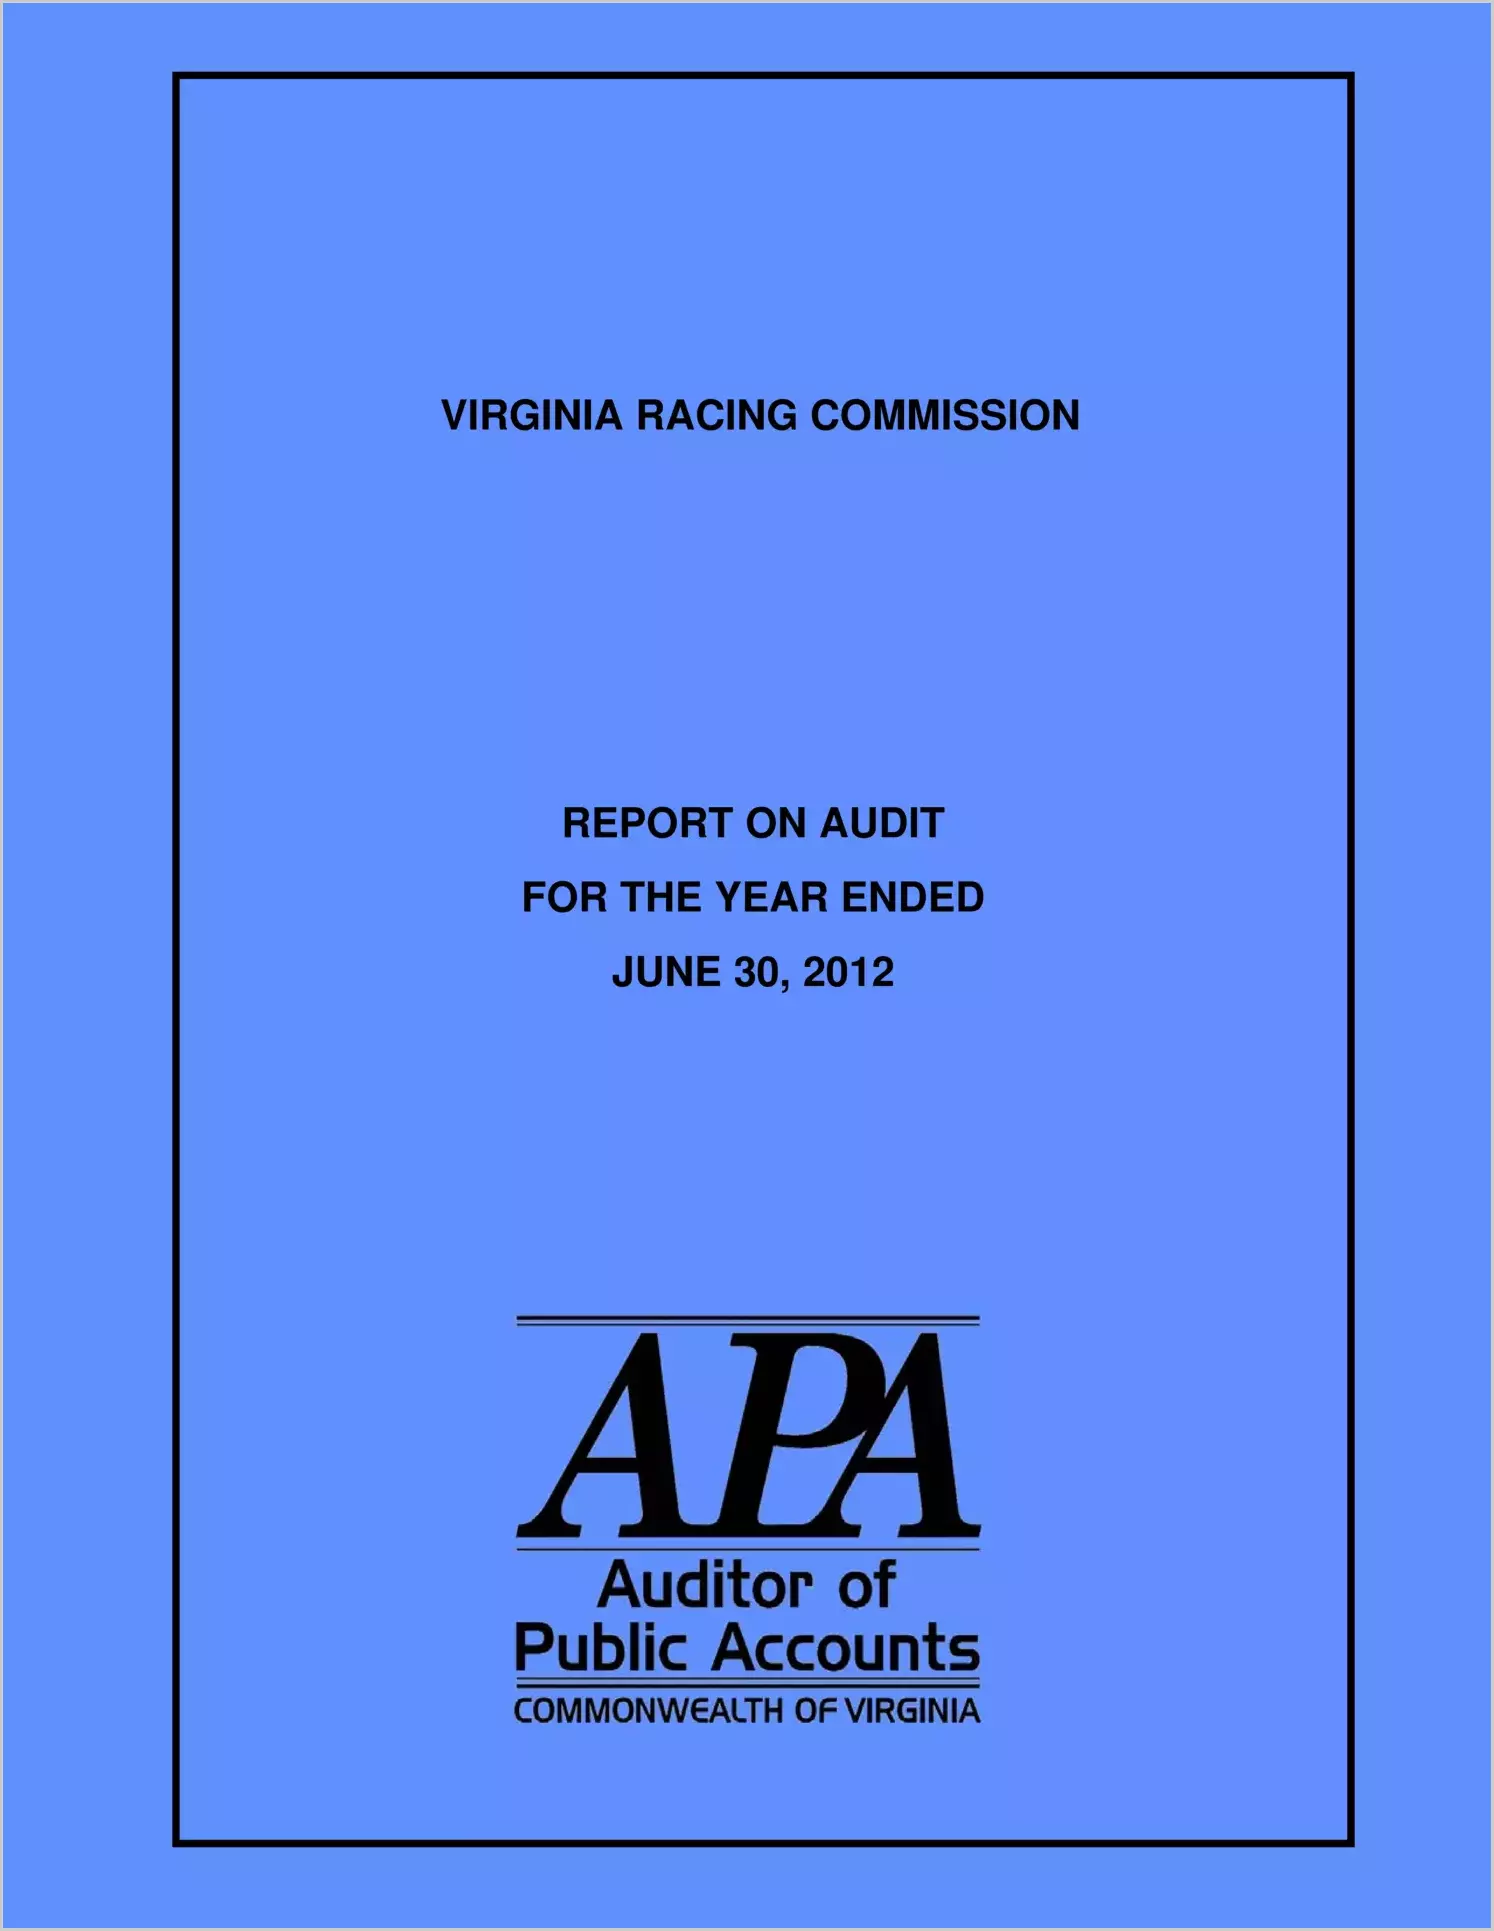 Virginia Racing Commission for the year ended June 30, 2012